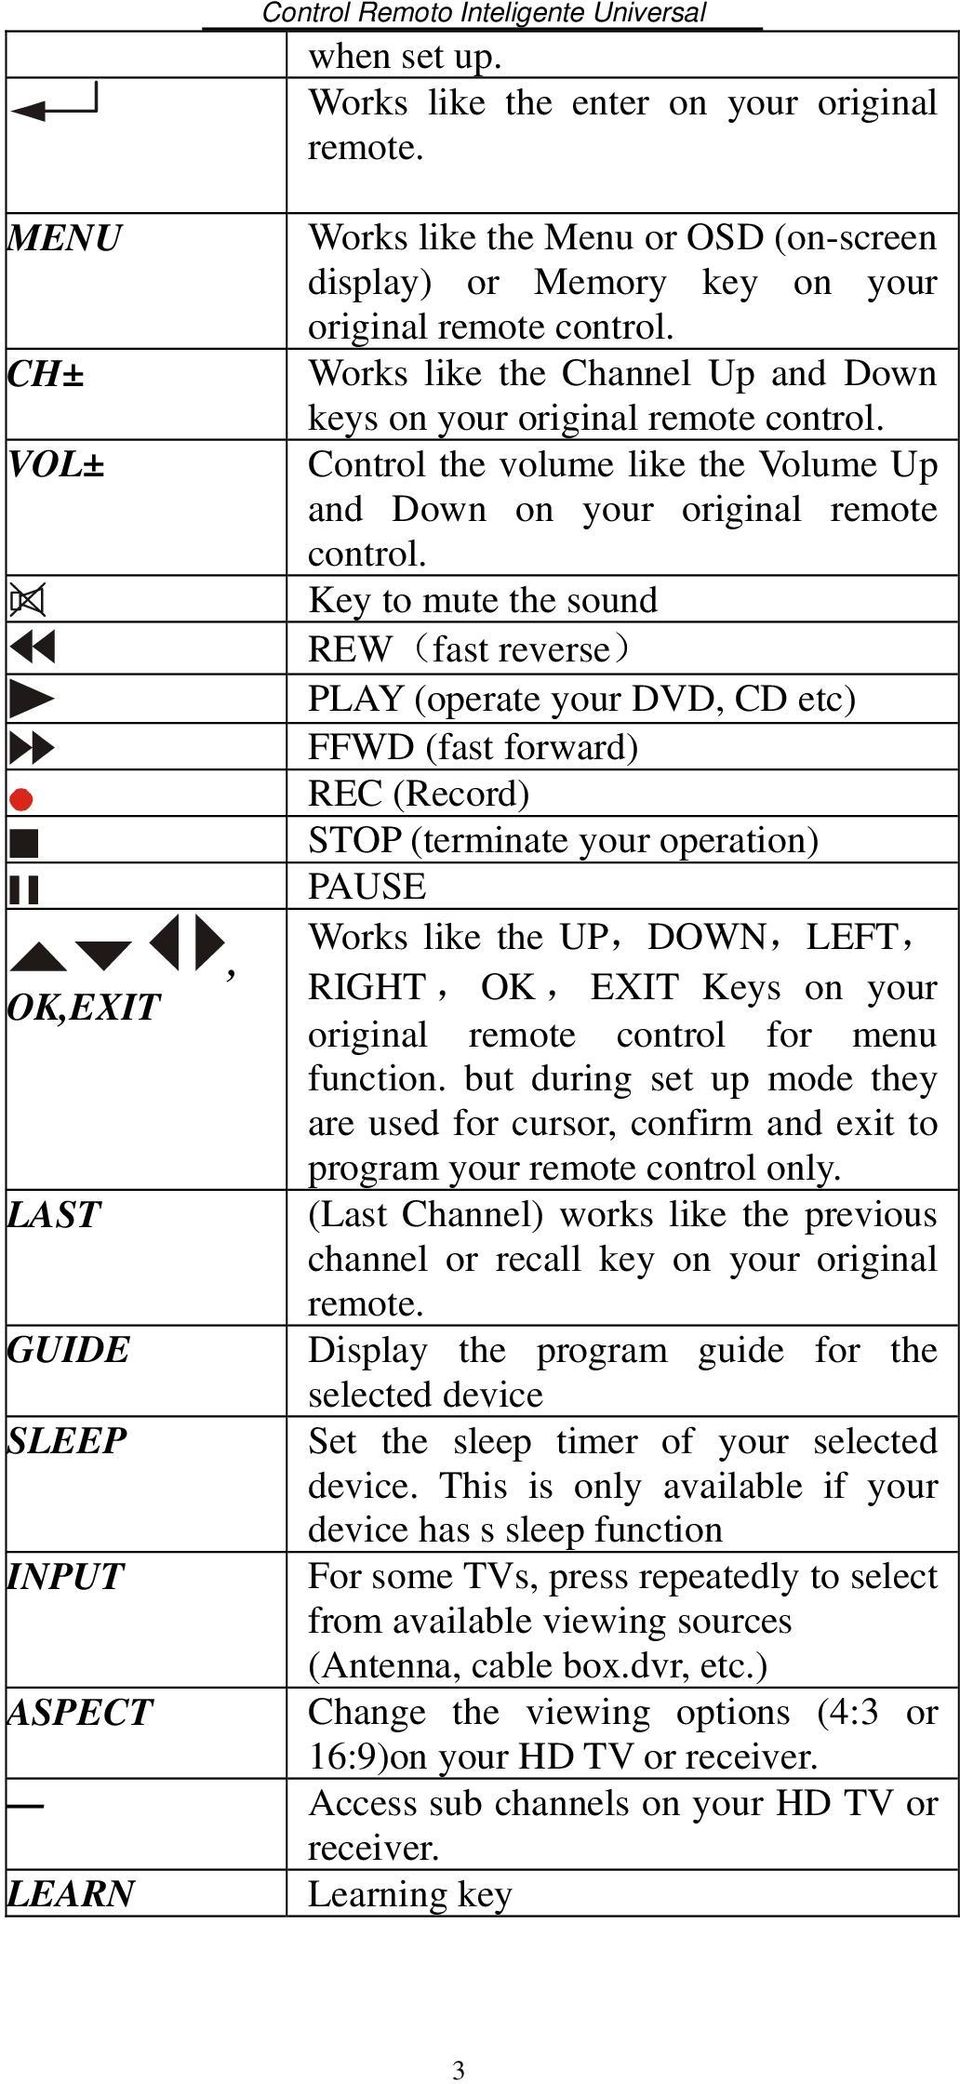 Key to mute the sound REW(fast reverse) PLAY (operate your DVD, CD etc) FFWD (fast forward) REC (Record) STOP (terminate your operation) PAUSE Works like the UP,DOWN,LEFT,, RIGHT, OK, EXIT Keys on